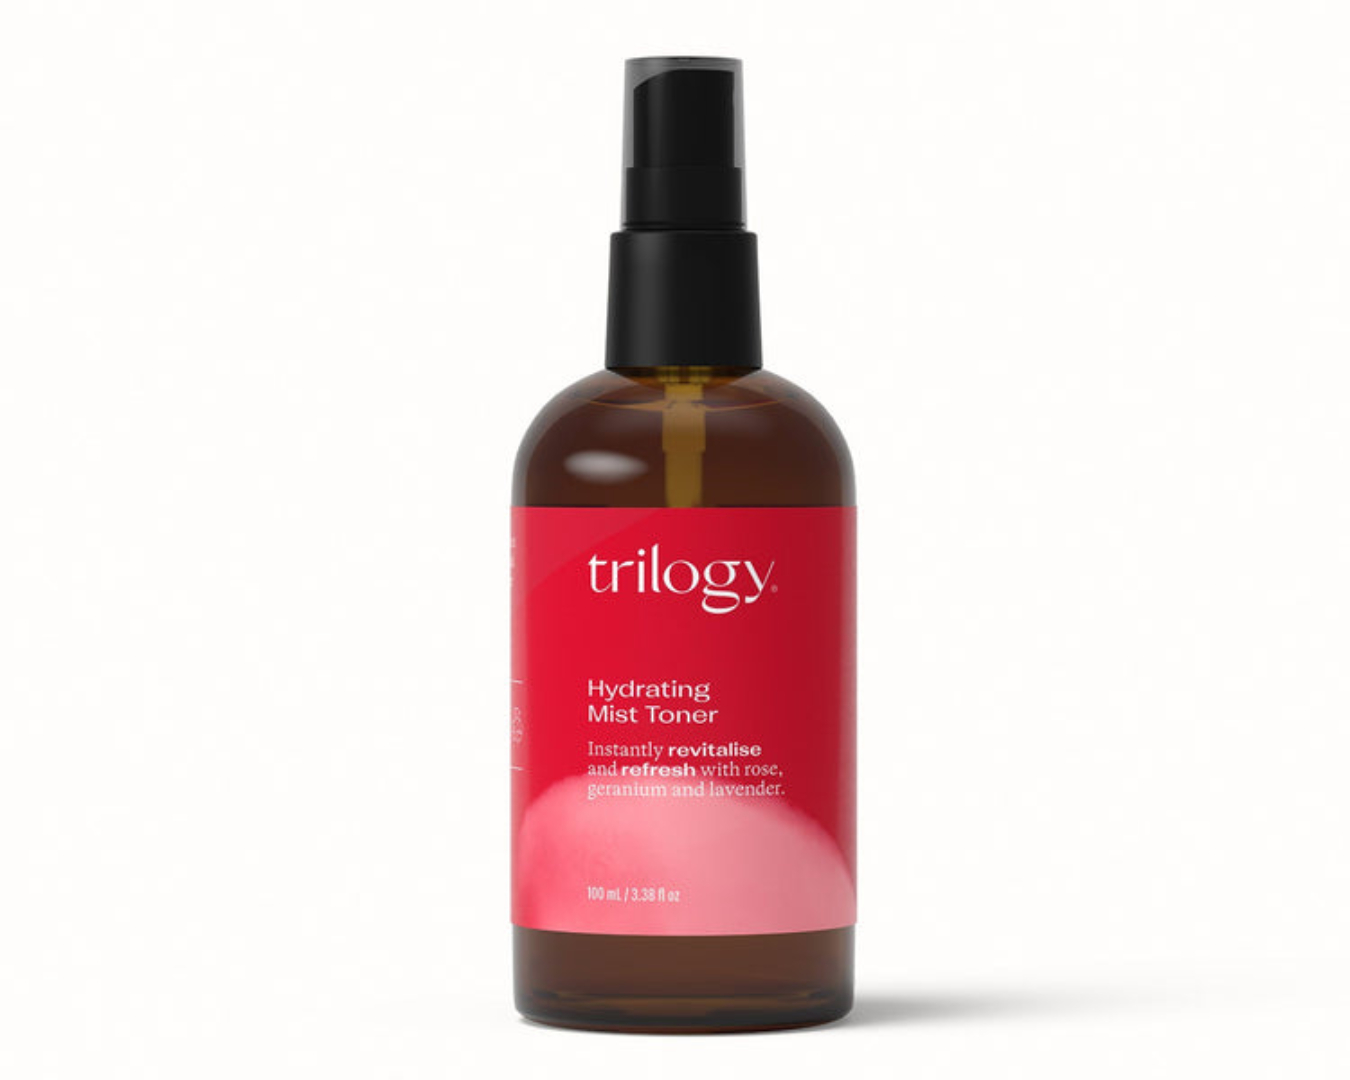 A bottle of Trilogy's Hydrating Mist Toner with key ingredients of rose, geranium and lavender visible on the label